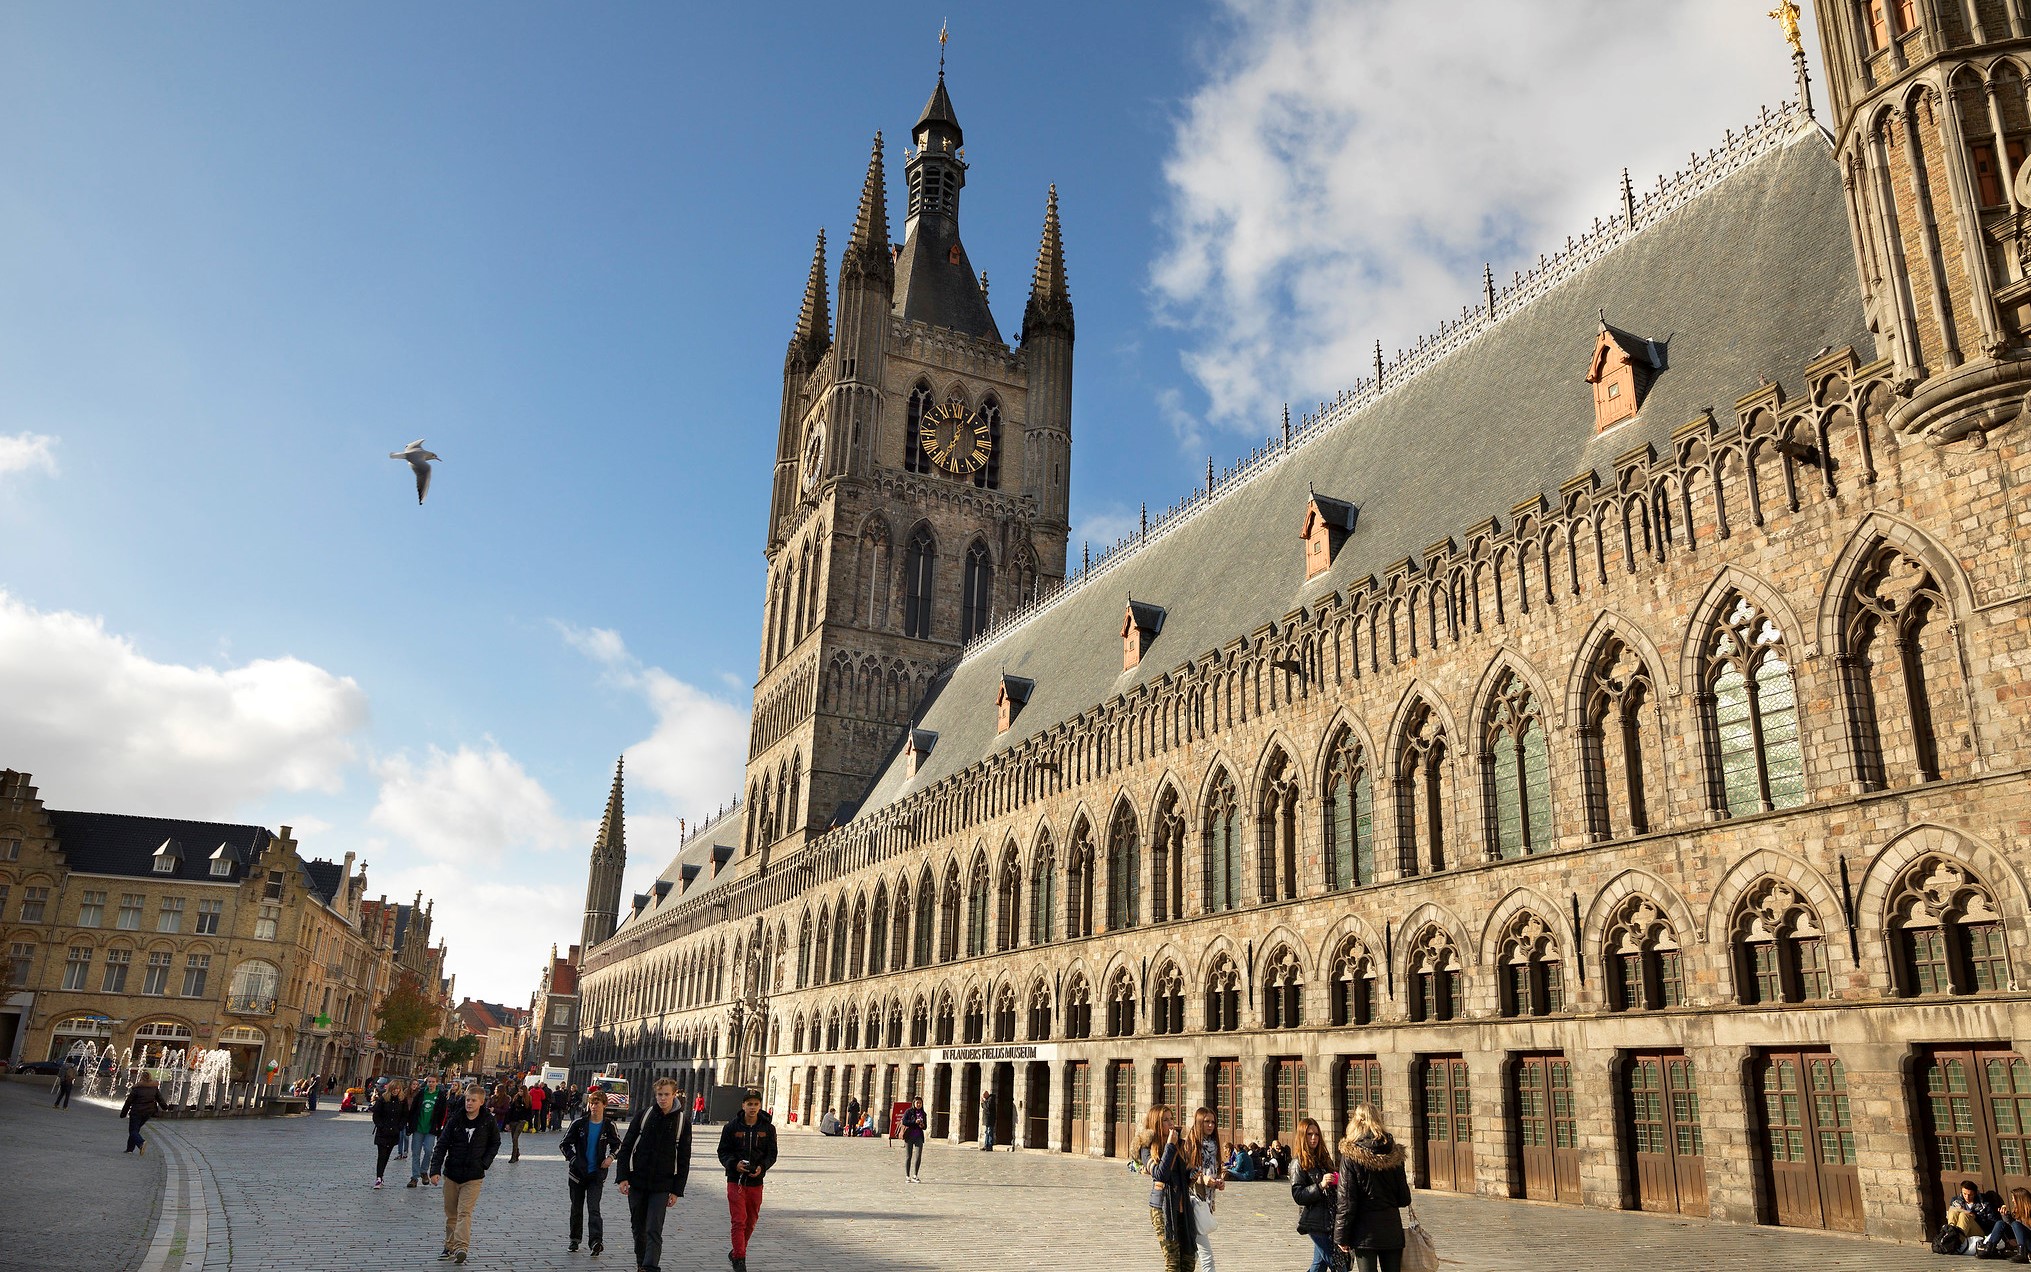 The Cloth Hall in Ypres